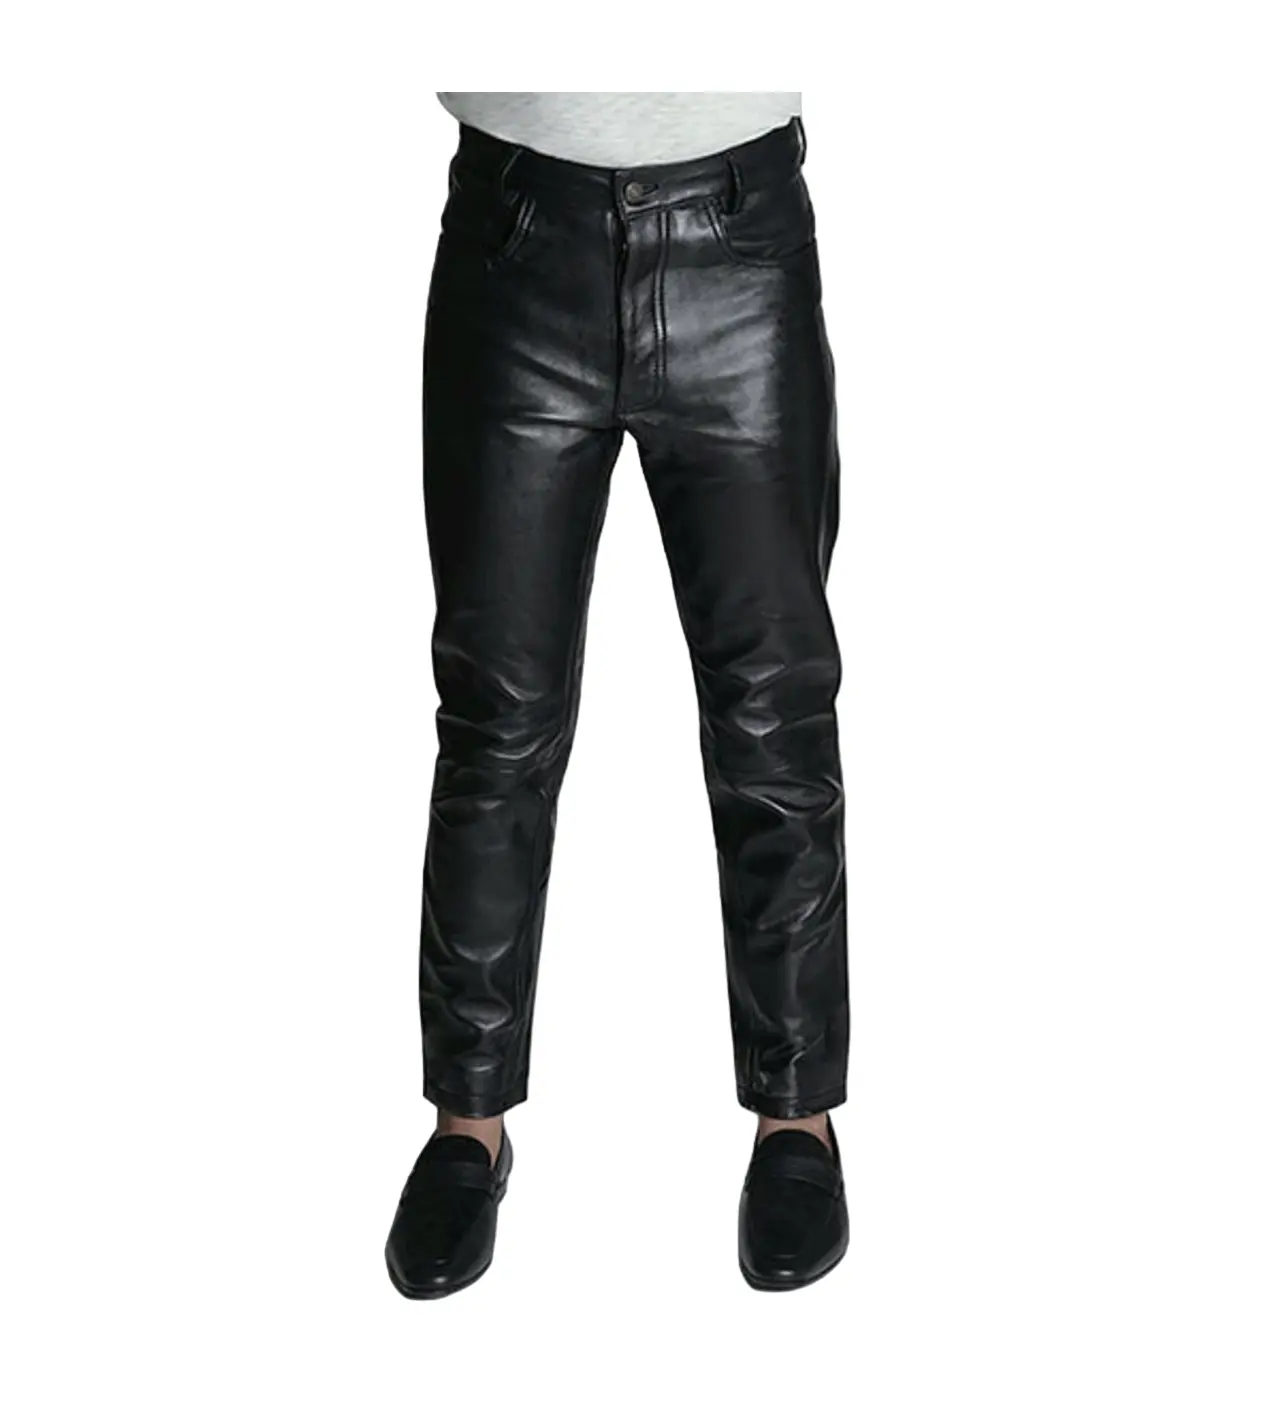 Original Leather Black Pant Lambskin Pants Trousers for Men Slim fit Genuine Leather Pants for Mens NAF Engineering Corp